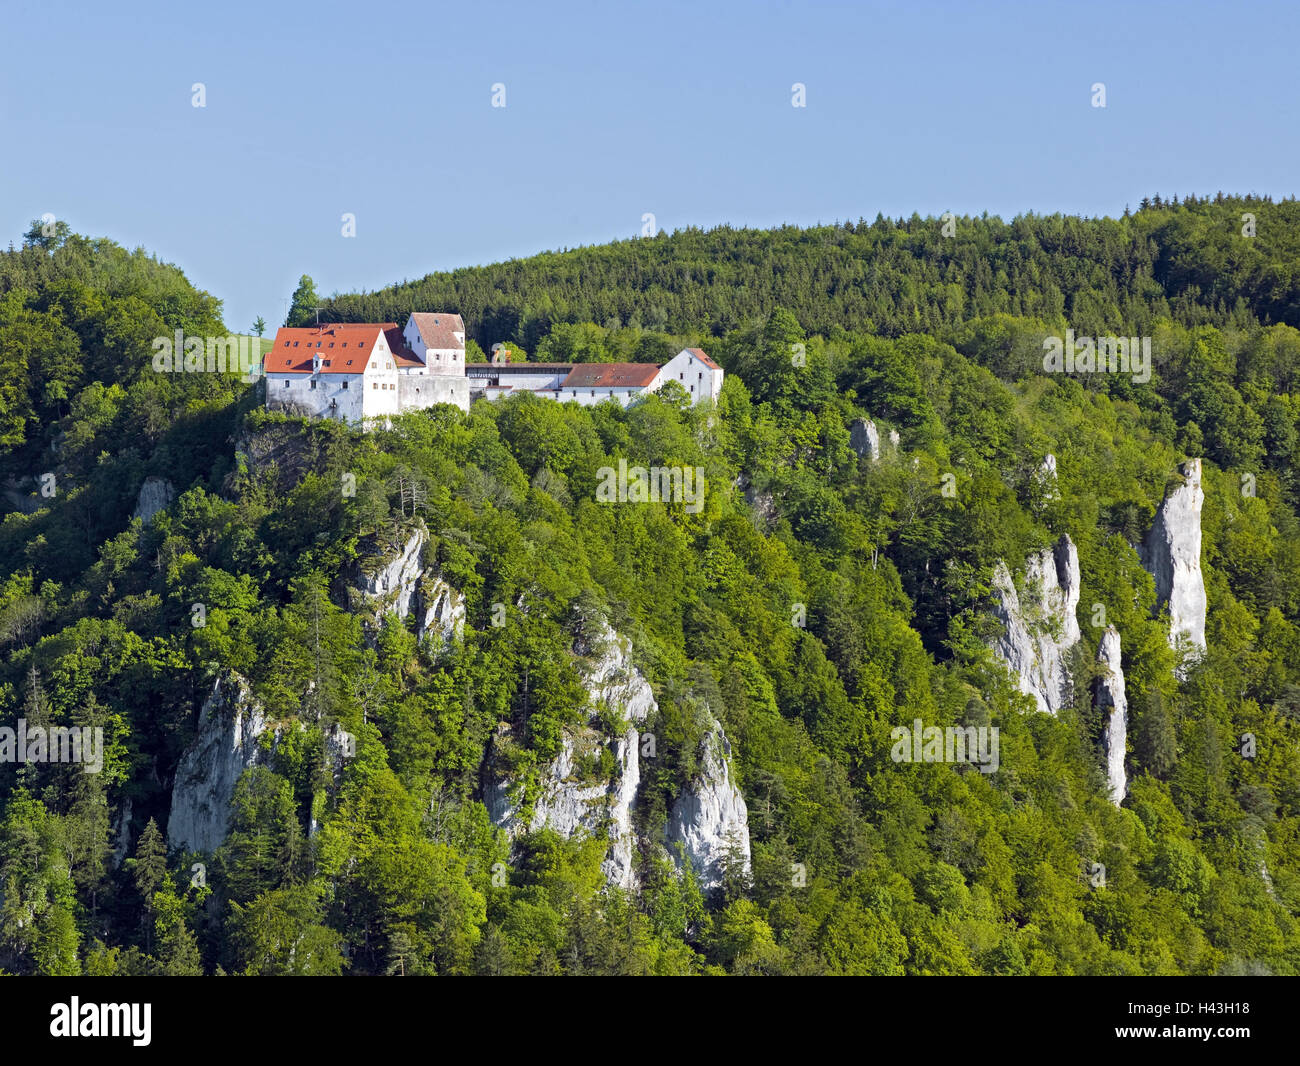 Germany, Baden-Wurttemberg, Leibertingen, youth hostel castle savage's stone, Danube valley, mountains, hill, rock, height castle, youth hostel, building, structure, destination, tourism, vacation, summer, mountain wood, seclusion, Idyll, rest, Stock Photo